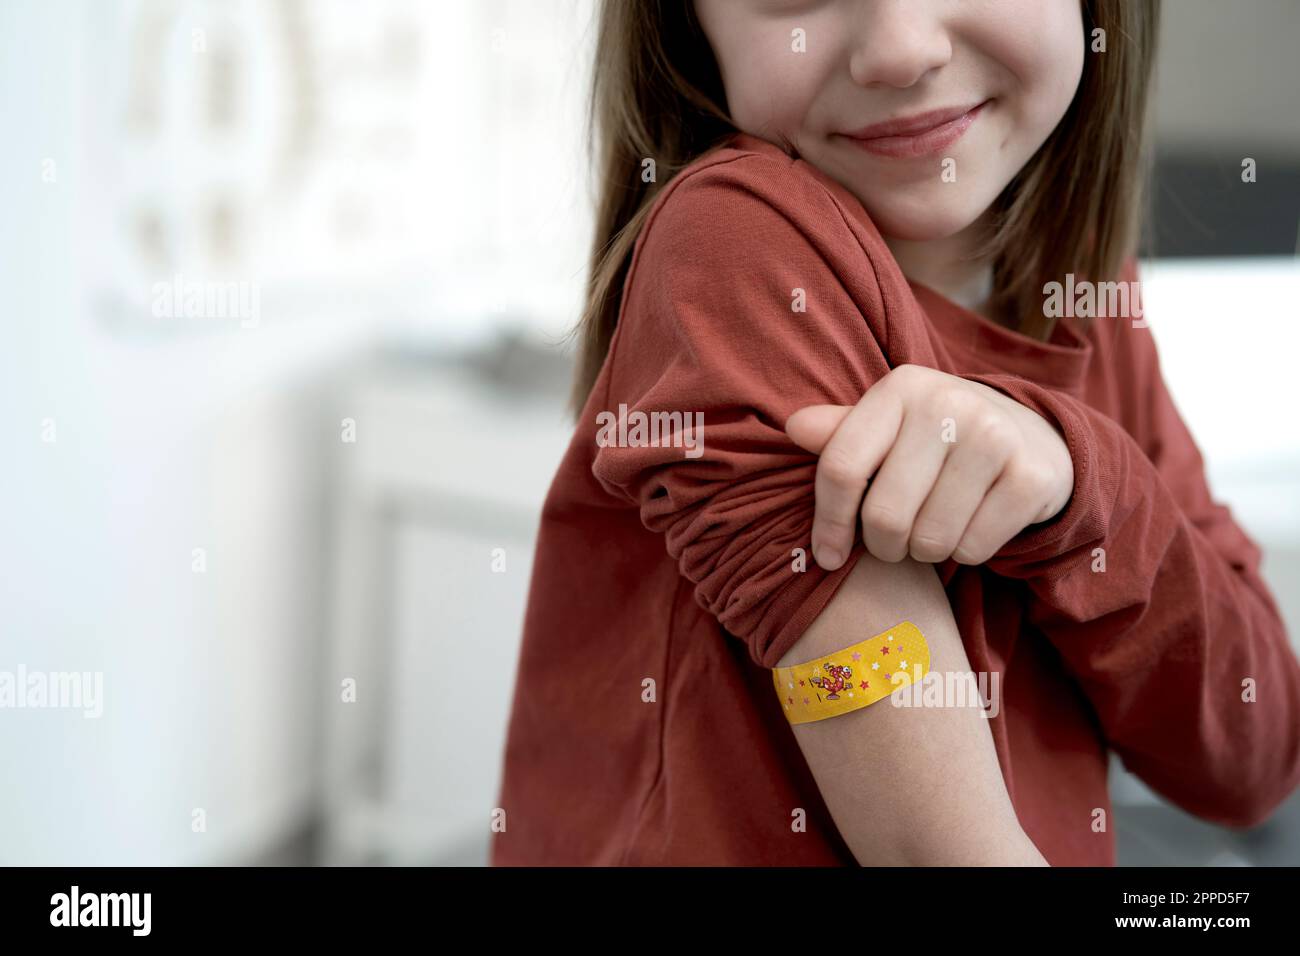 Smiling girl showing adhesive bandage after vaccination in clinic Stock Photo